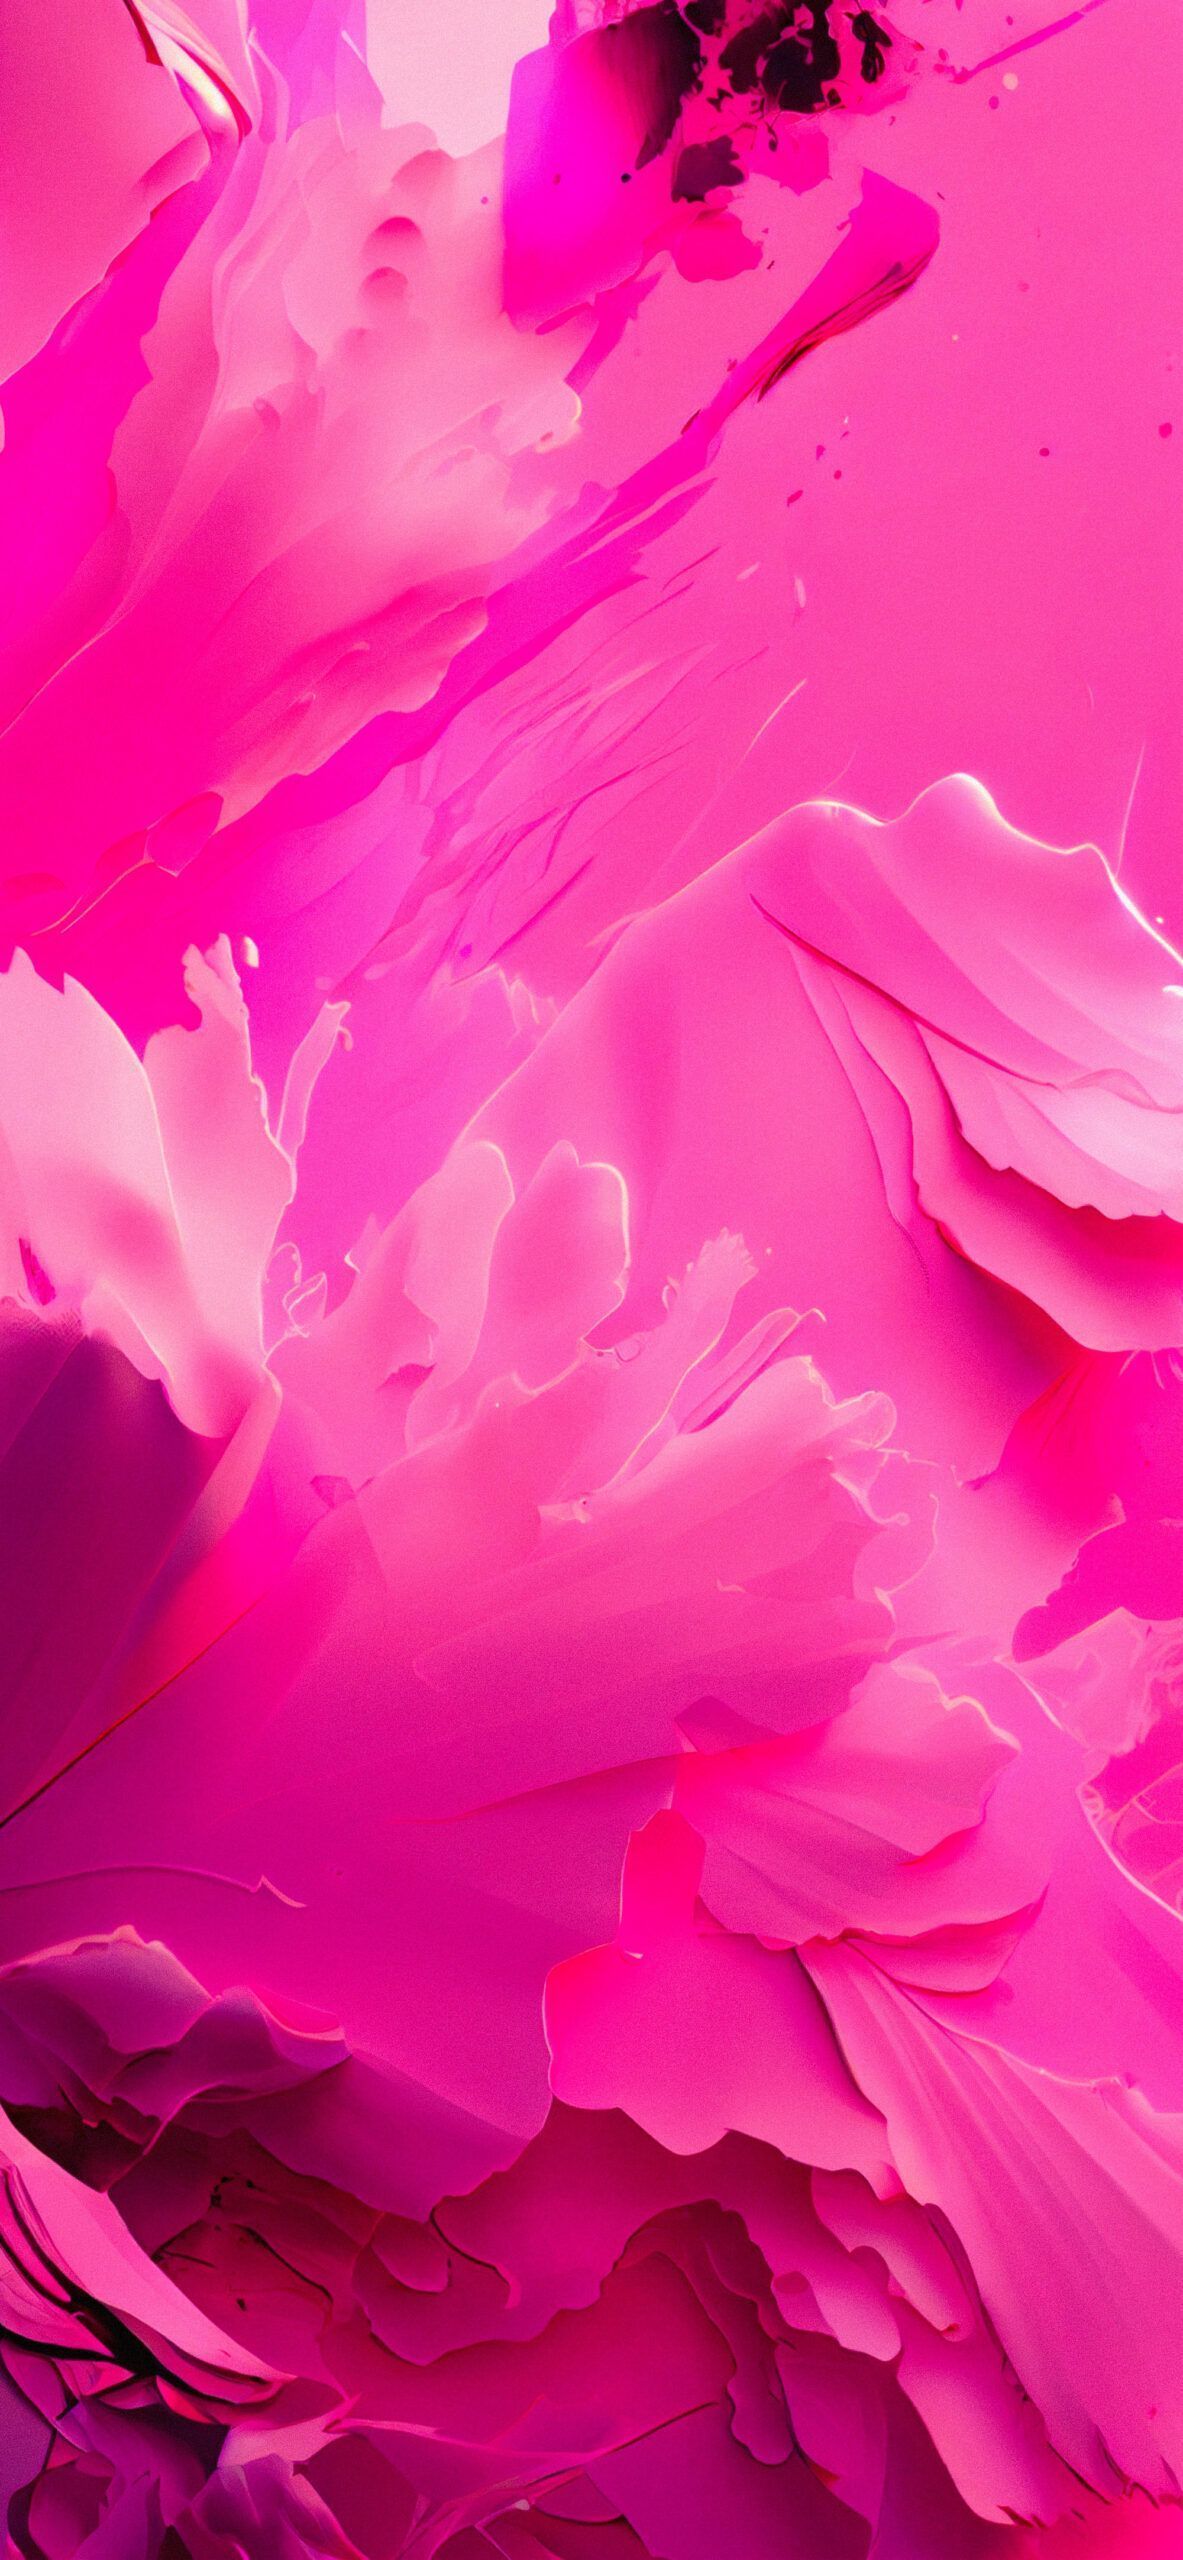 Abstract Hot Pink Wallpaper Phone Aesthetic Pink Wallpaper